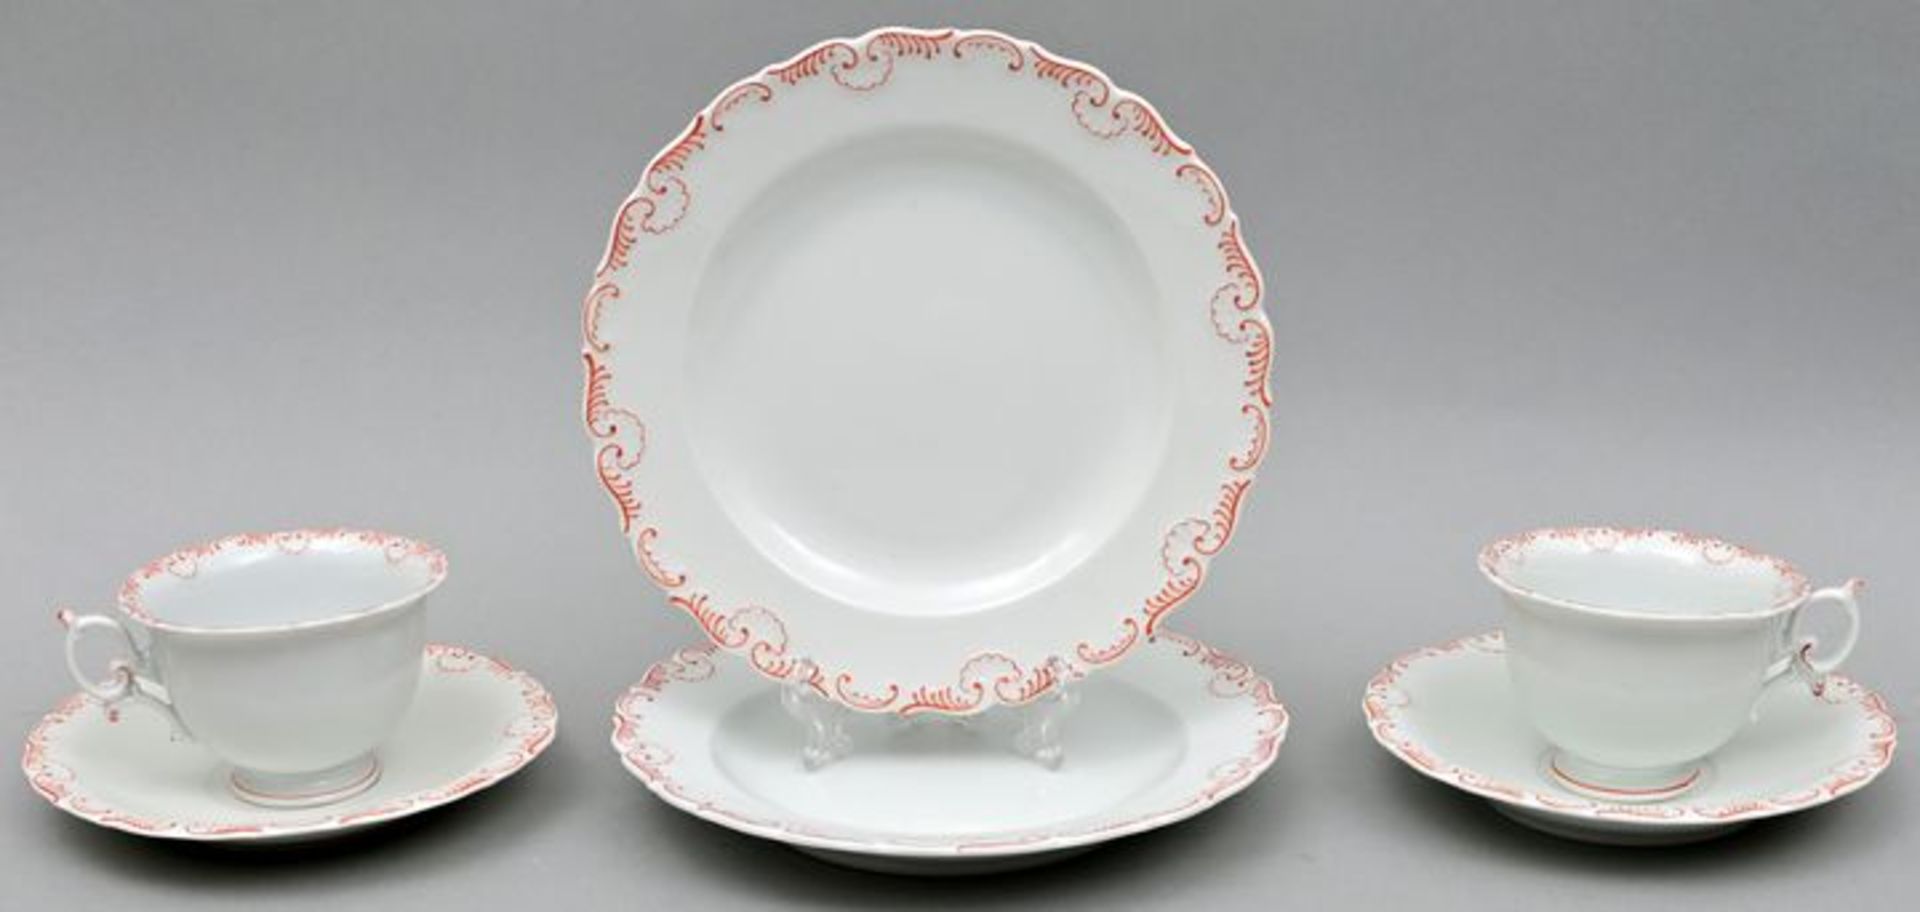 Meissen-Gedecke/ cups with saucers and plates